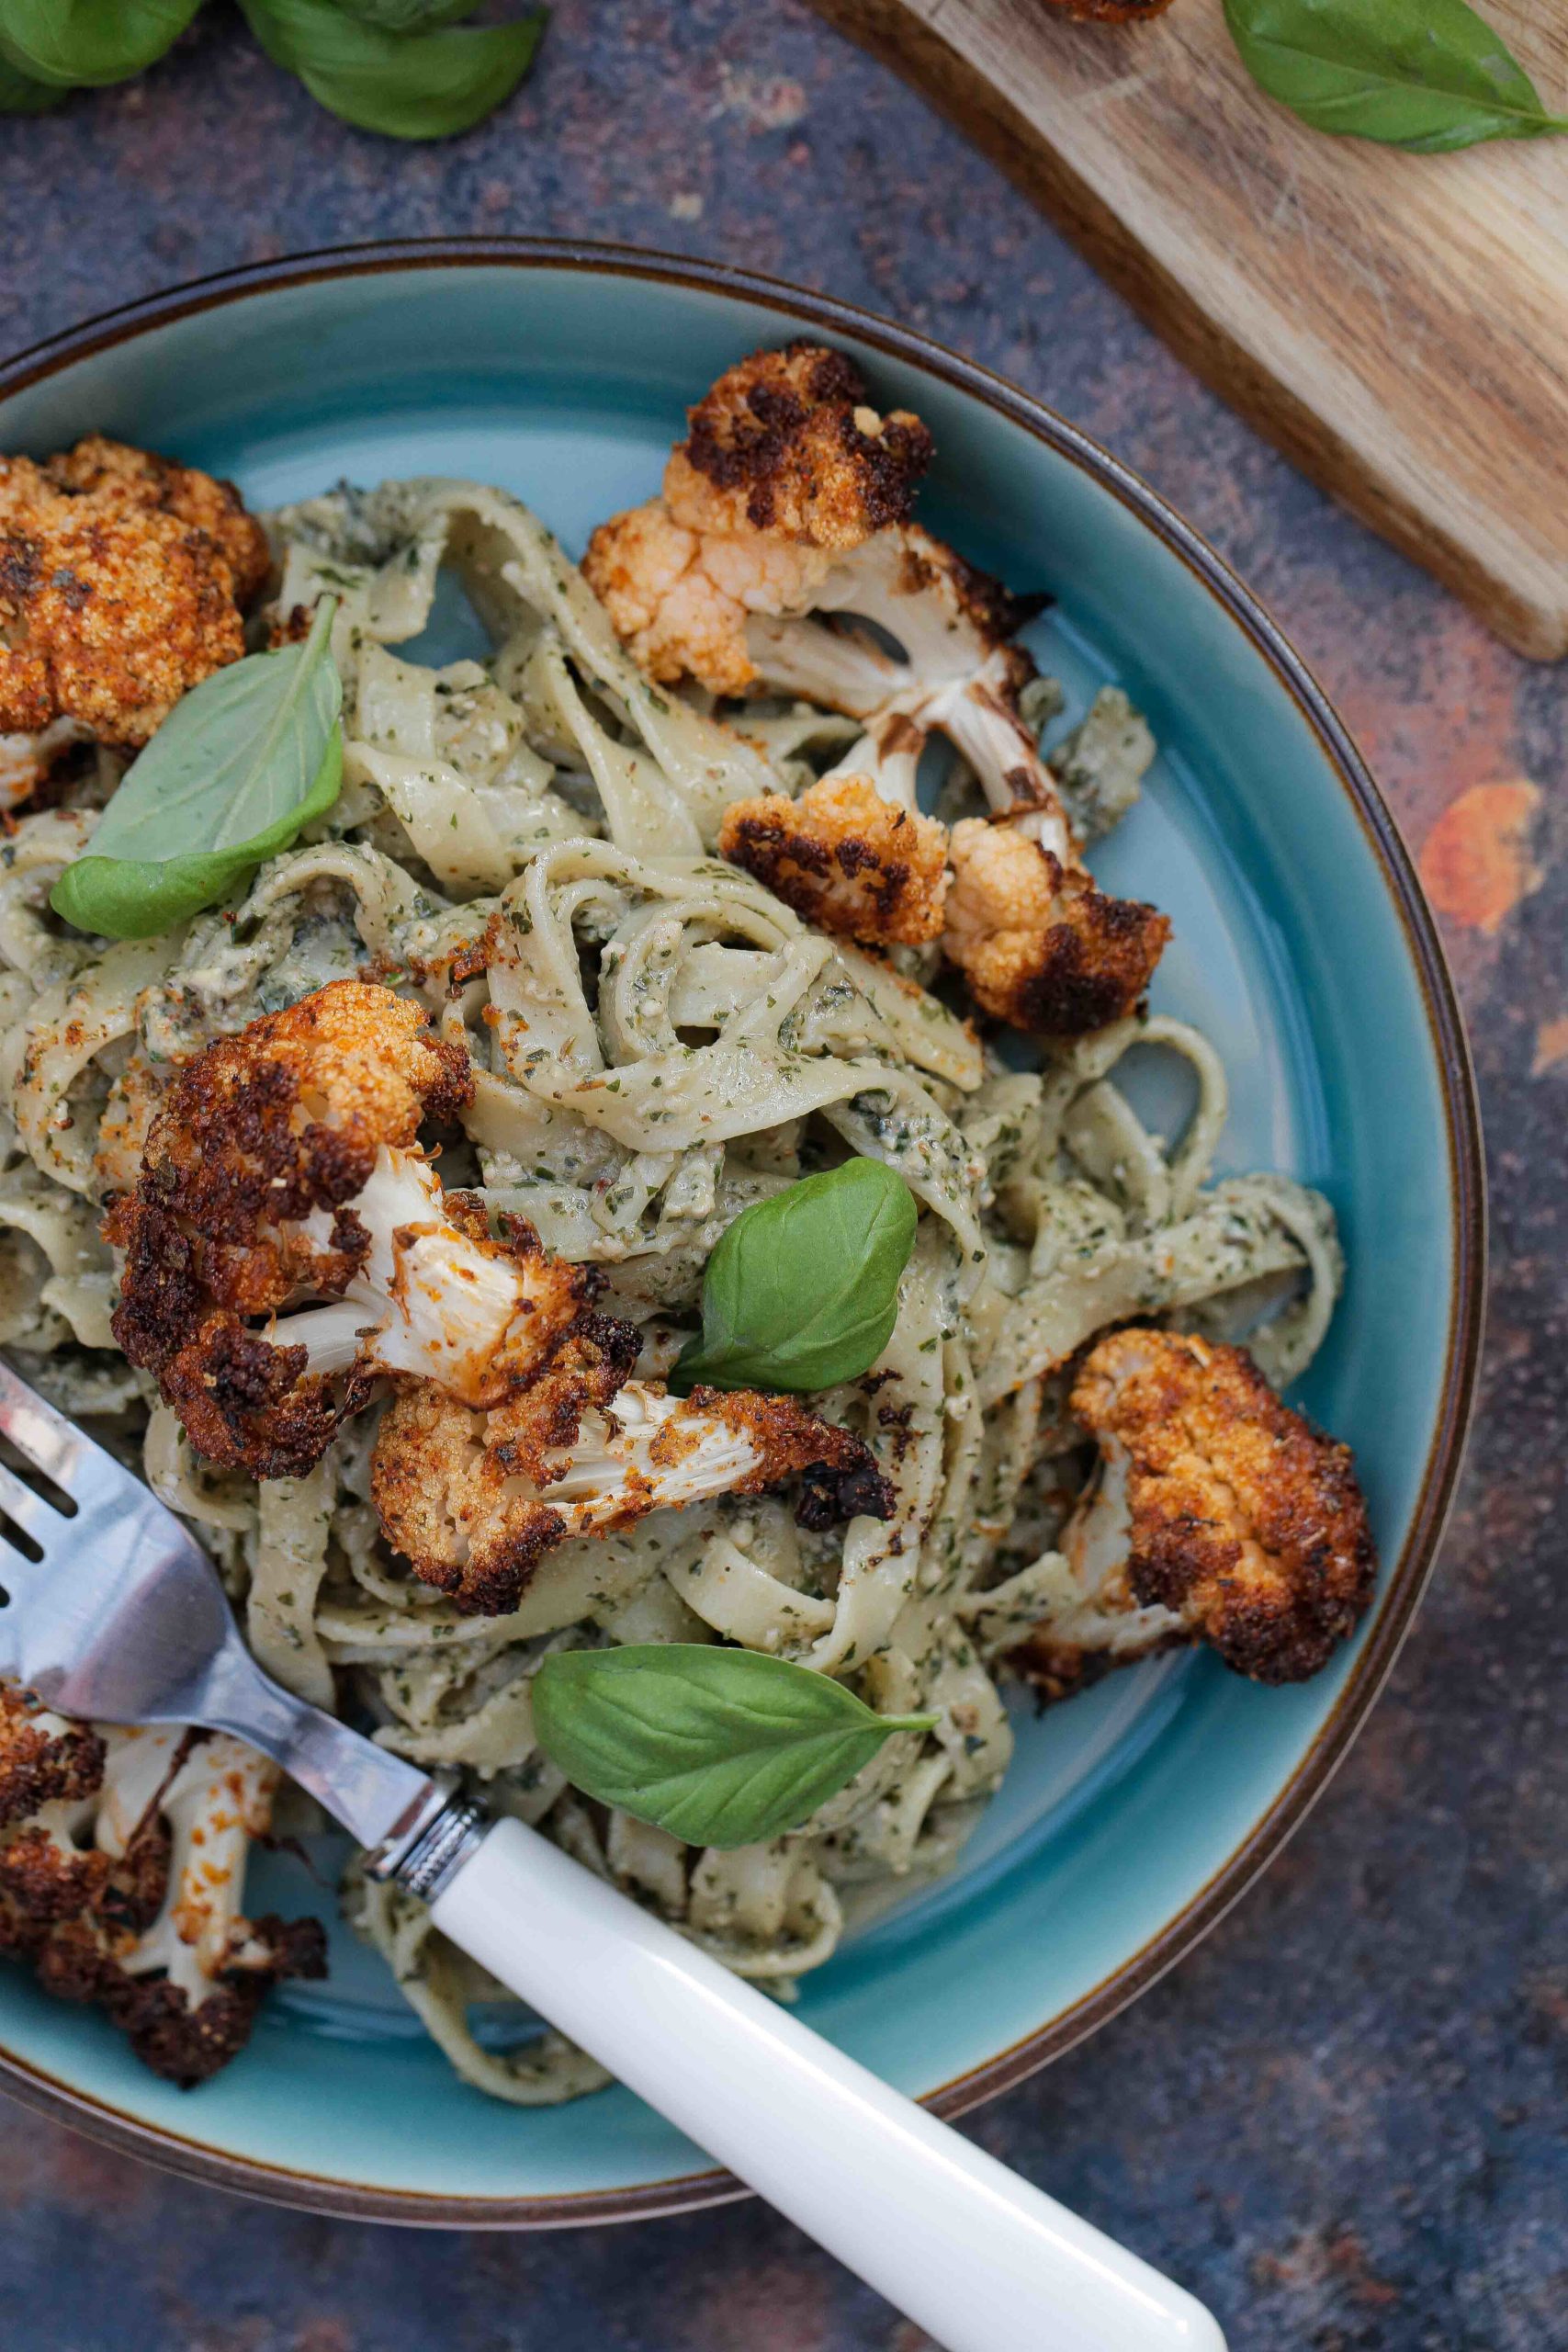 Herby basil pesto stirred through tagliatelle and topped with lightly spiced crispy roast cauliflower. A lovely contrast of textures and flavours that work perfectly together for an easy weeknight meal or date night deliciousness! Recipe on thecookandhim.com | #veganpesto #roastcauliflower #veganmeal #vegandinner #cauliflowerrecipes